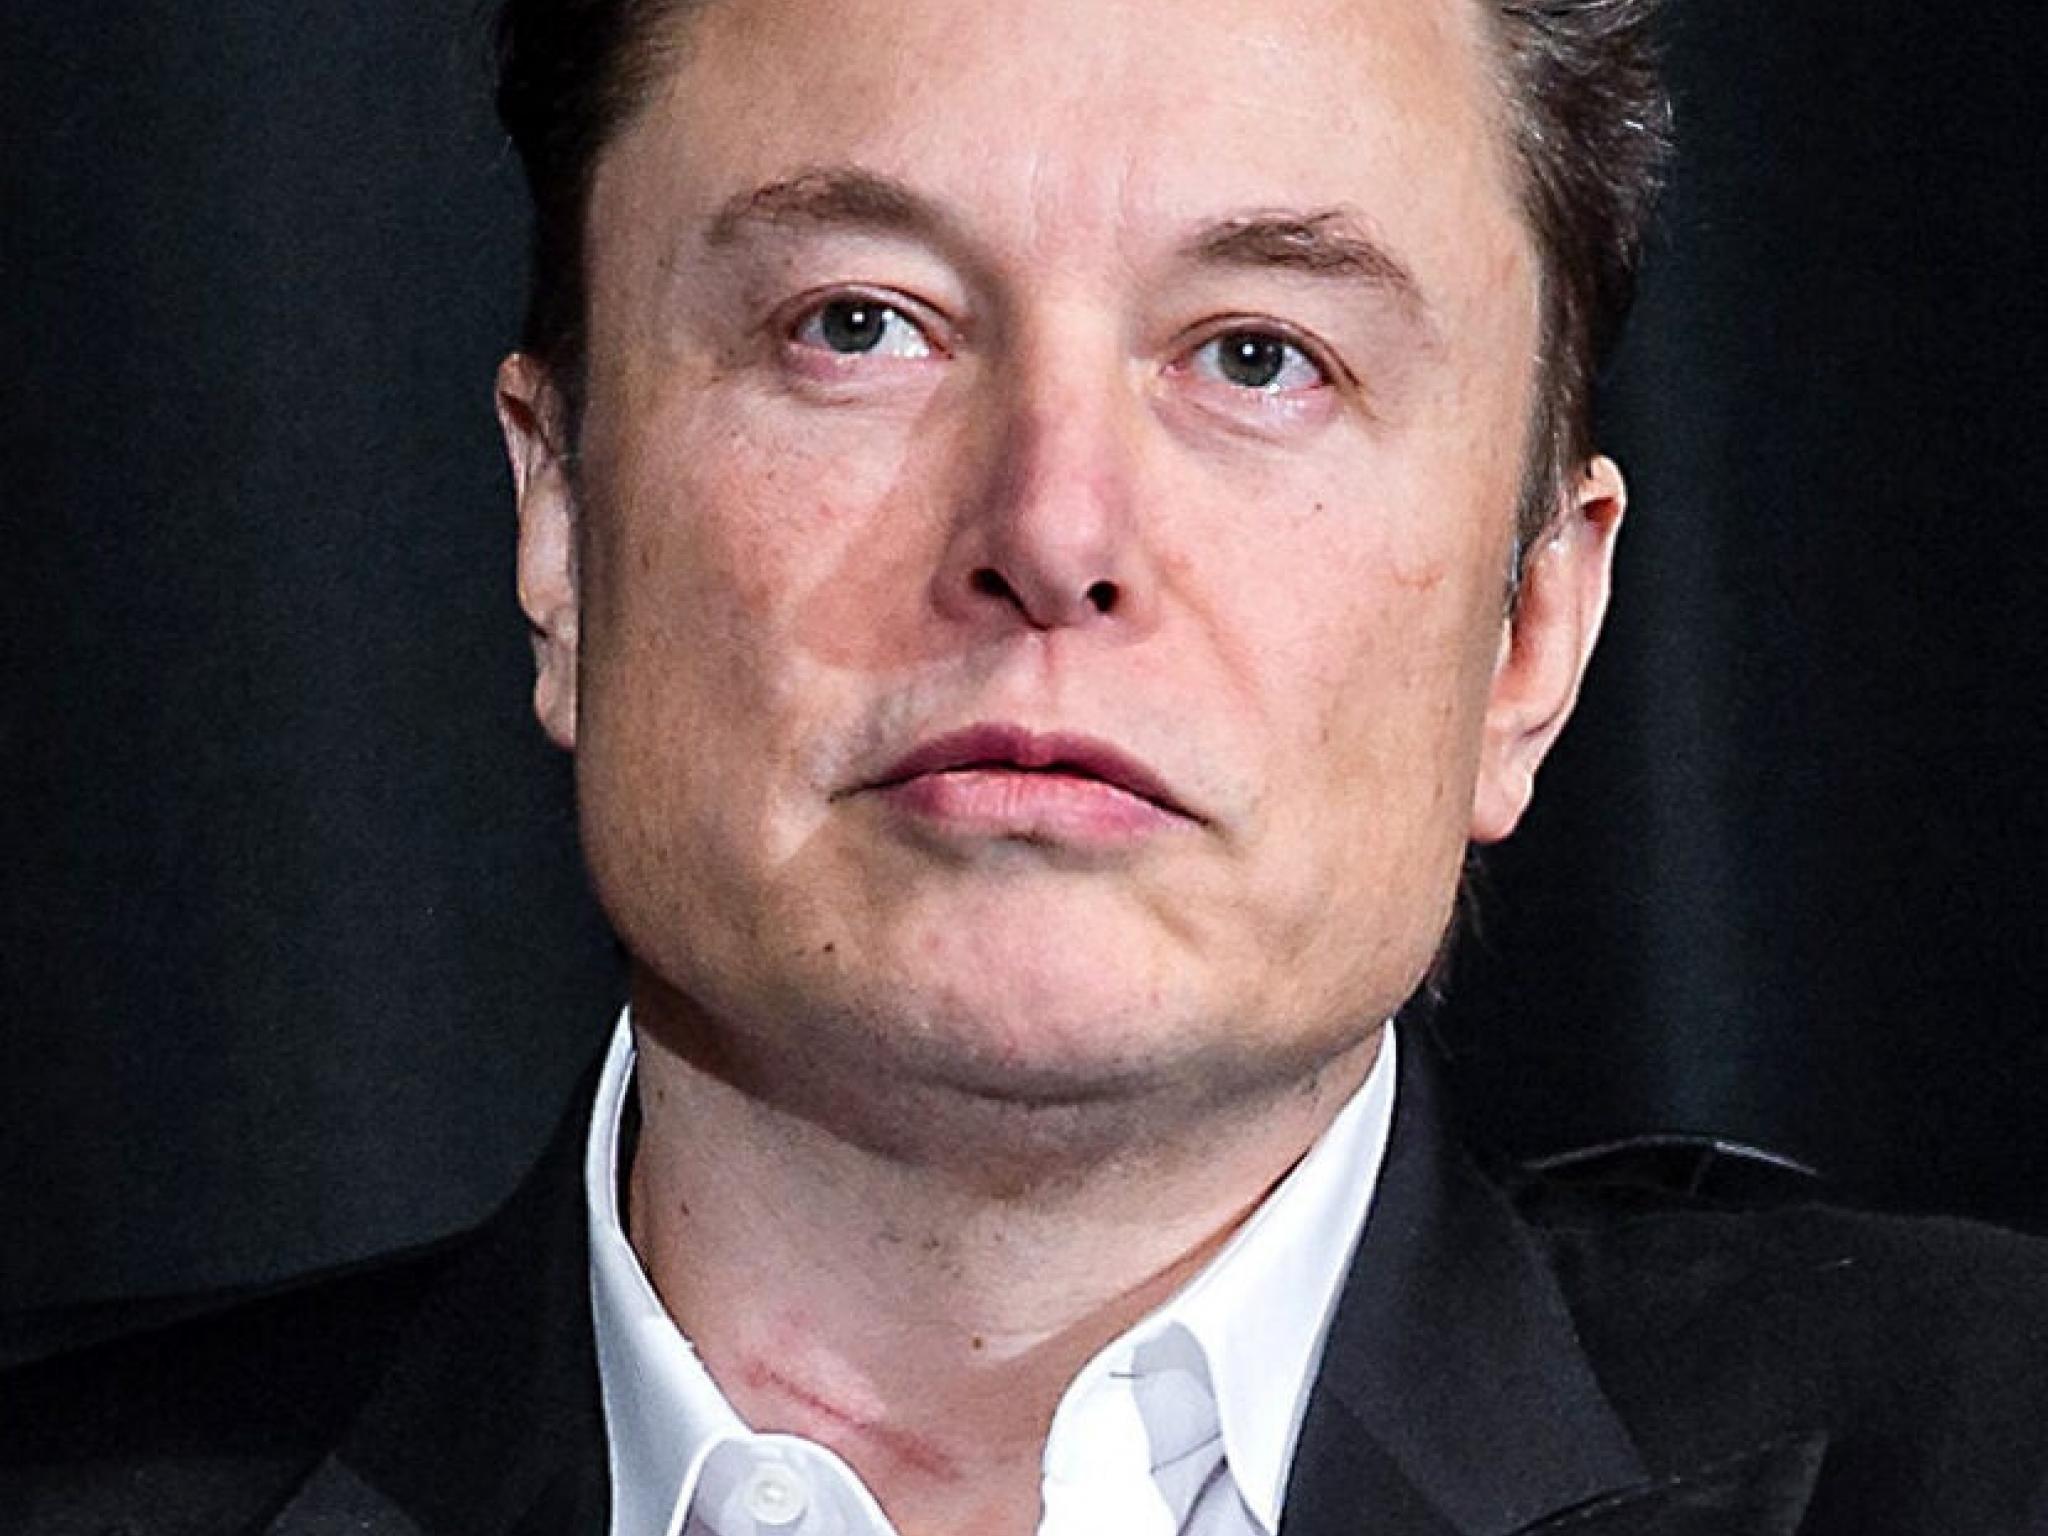  elon-musk-shuts-down-smartphone-rumors-we-are-not-going-to-do-a-tesla-phone 